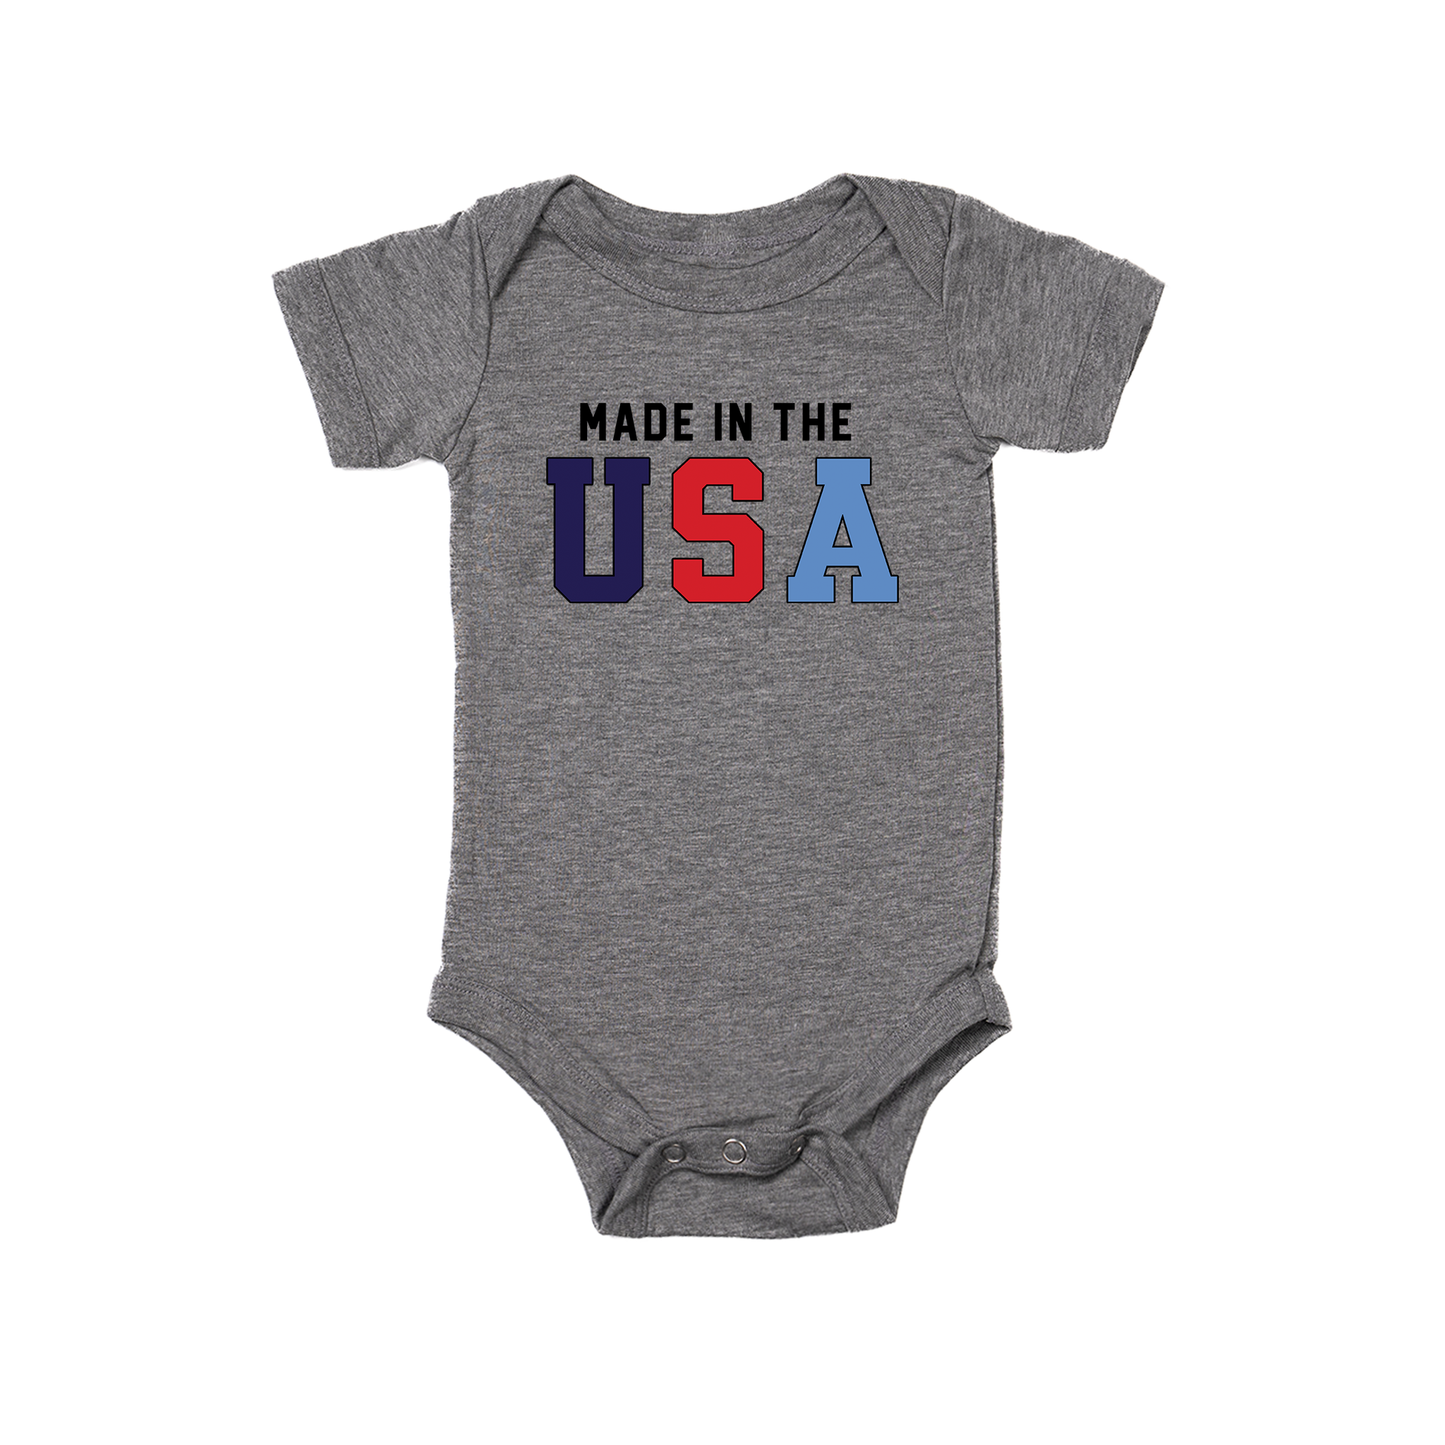 Made in the USA - Bodysuit (Gray, Short Sleeve)